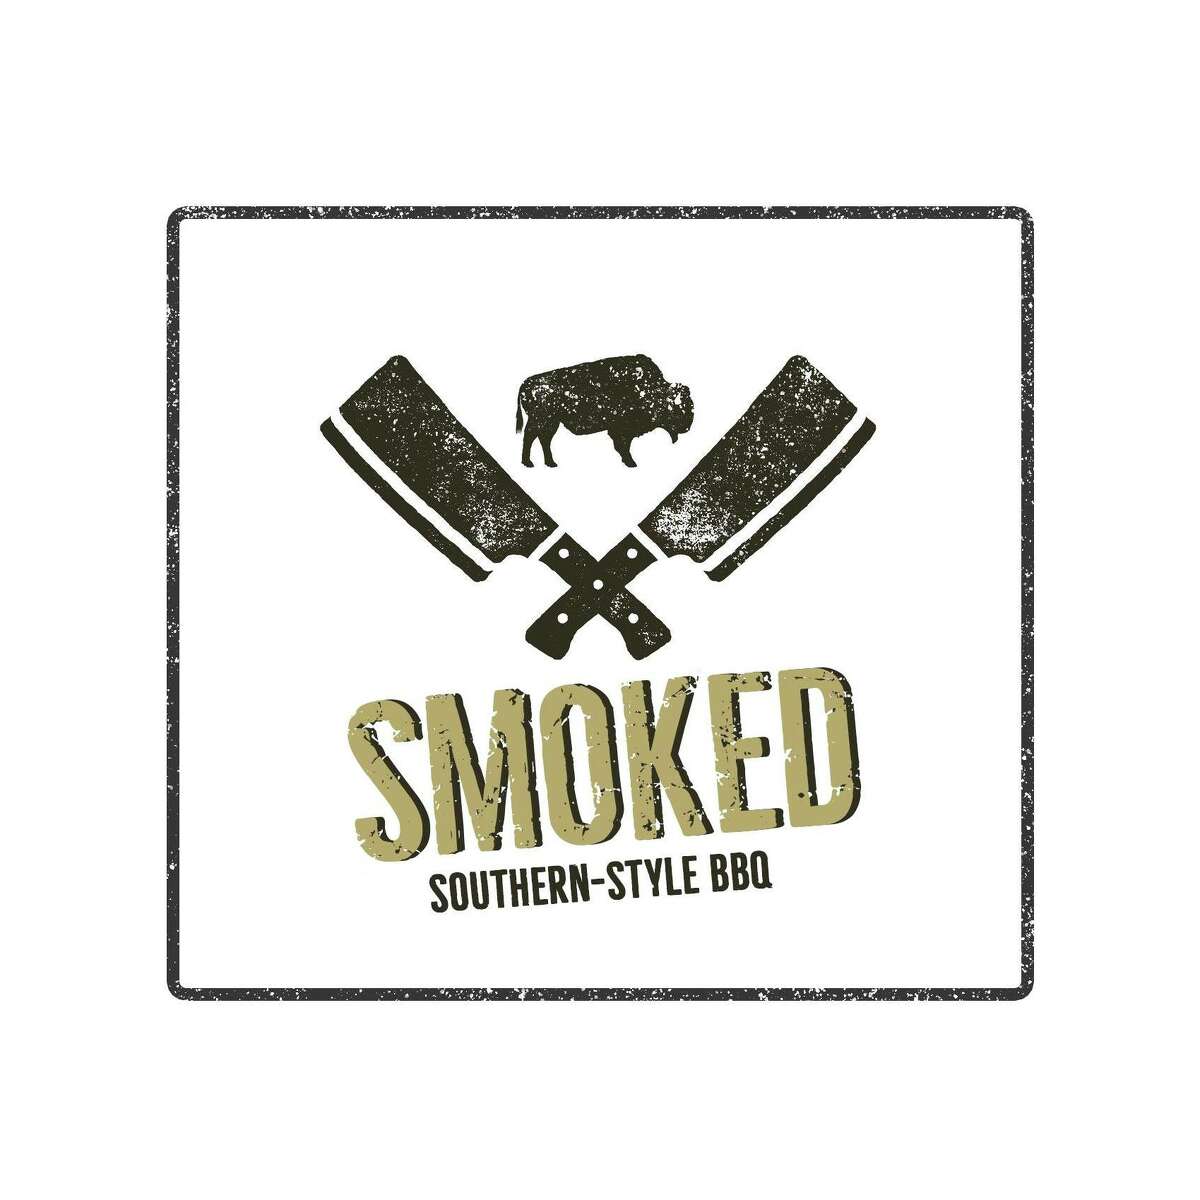 A restaurant called Smoked: Southern-Style barbecue is being developed for an opening later this year.